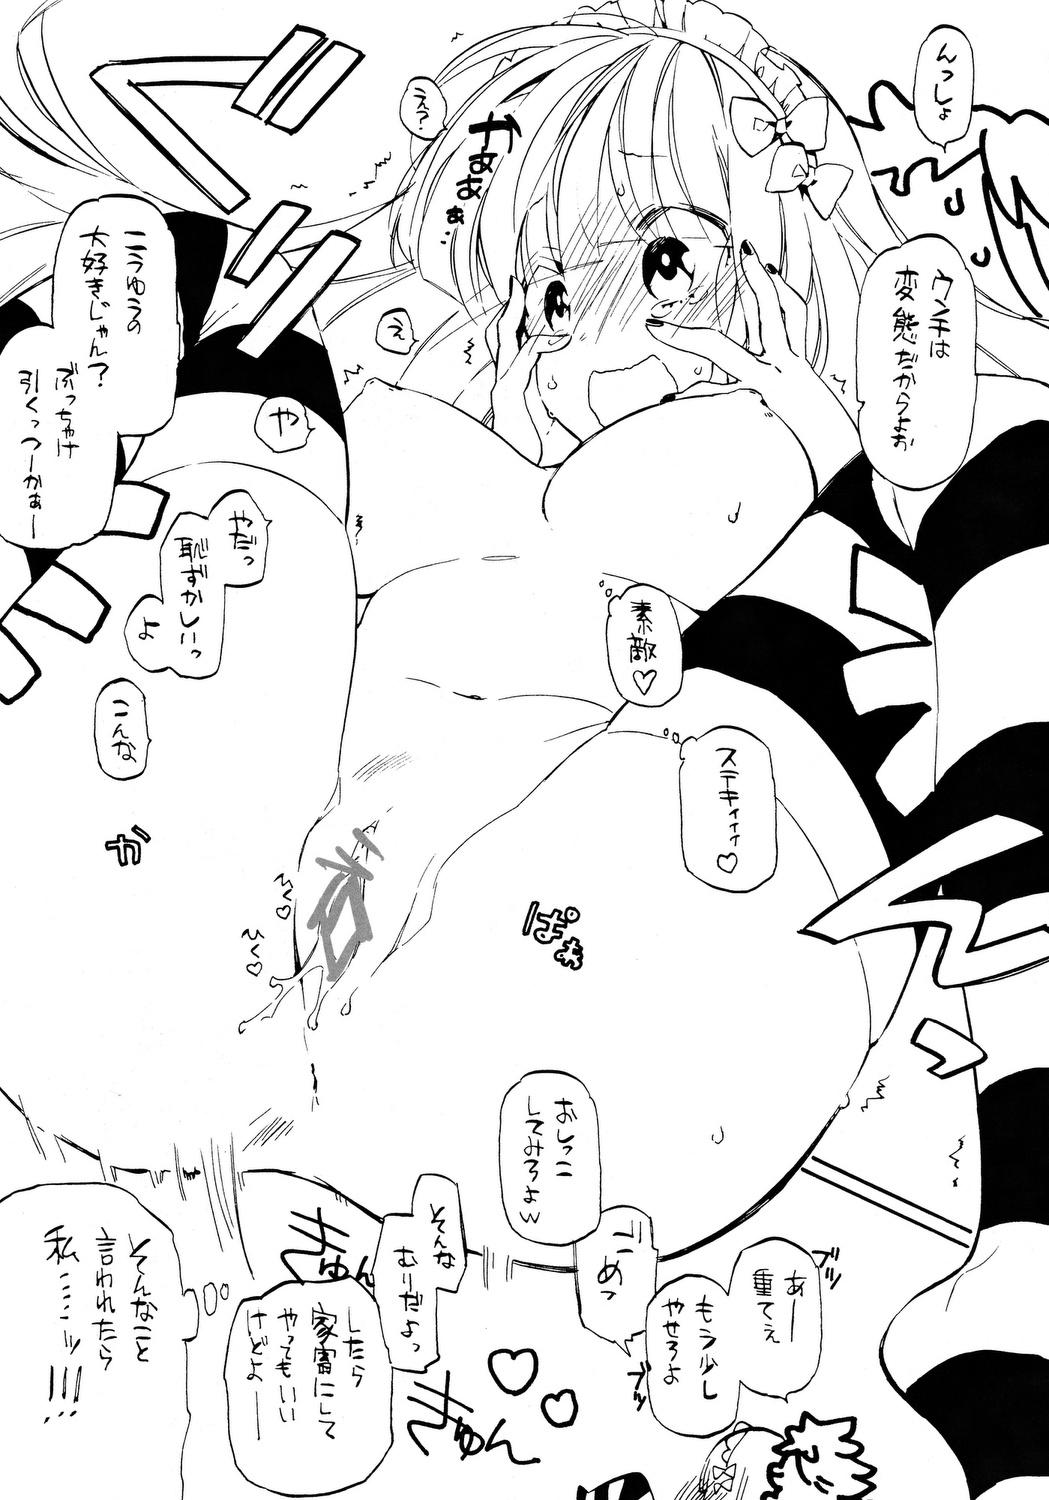 Beurette Honey Honey - Panty and stocking with garterbelt Shaking - Page 11